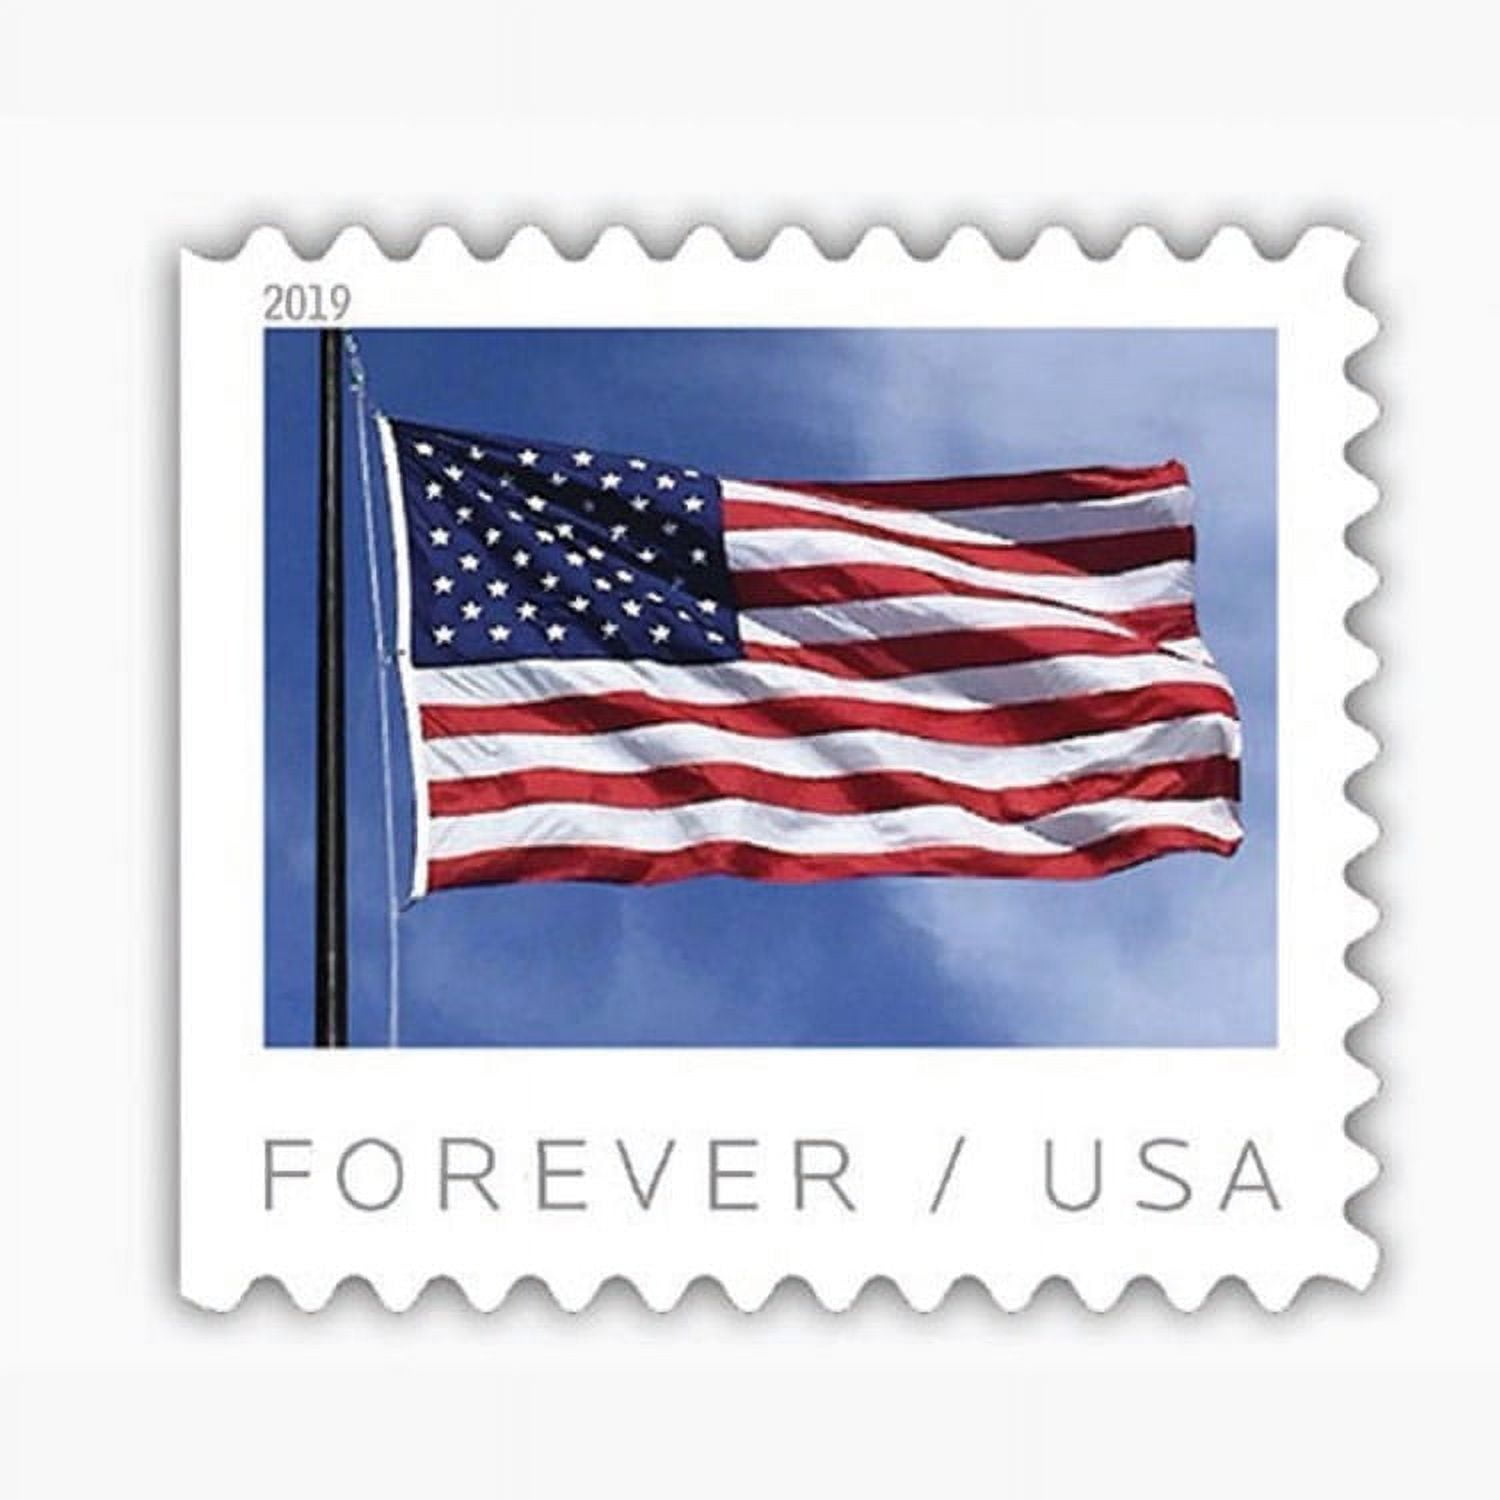 Forever 21, Office, Forever Stamps Roll Of 10 1st Class